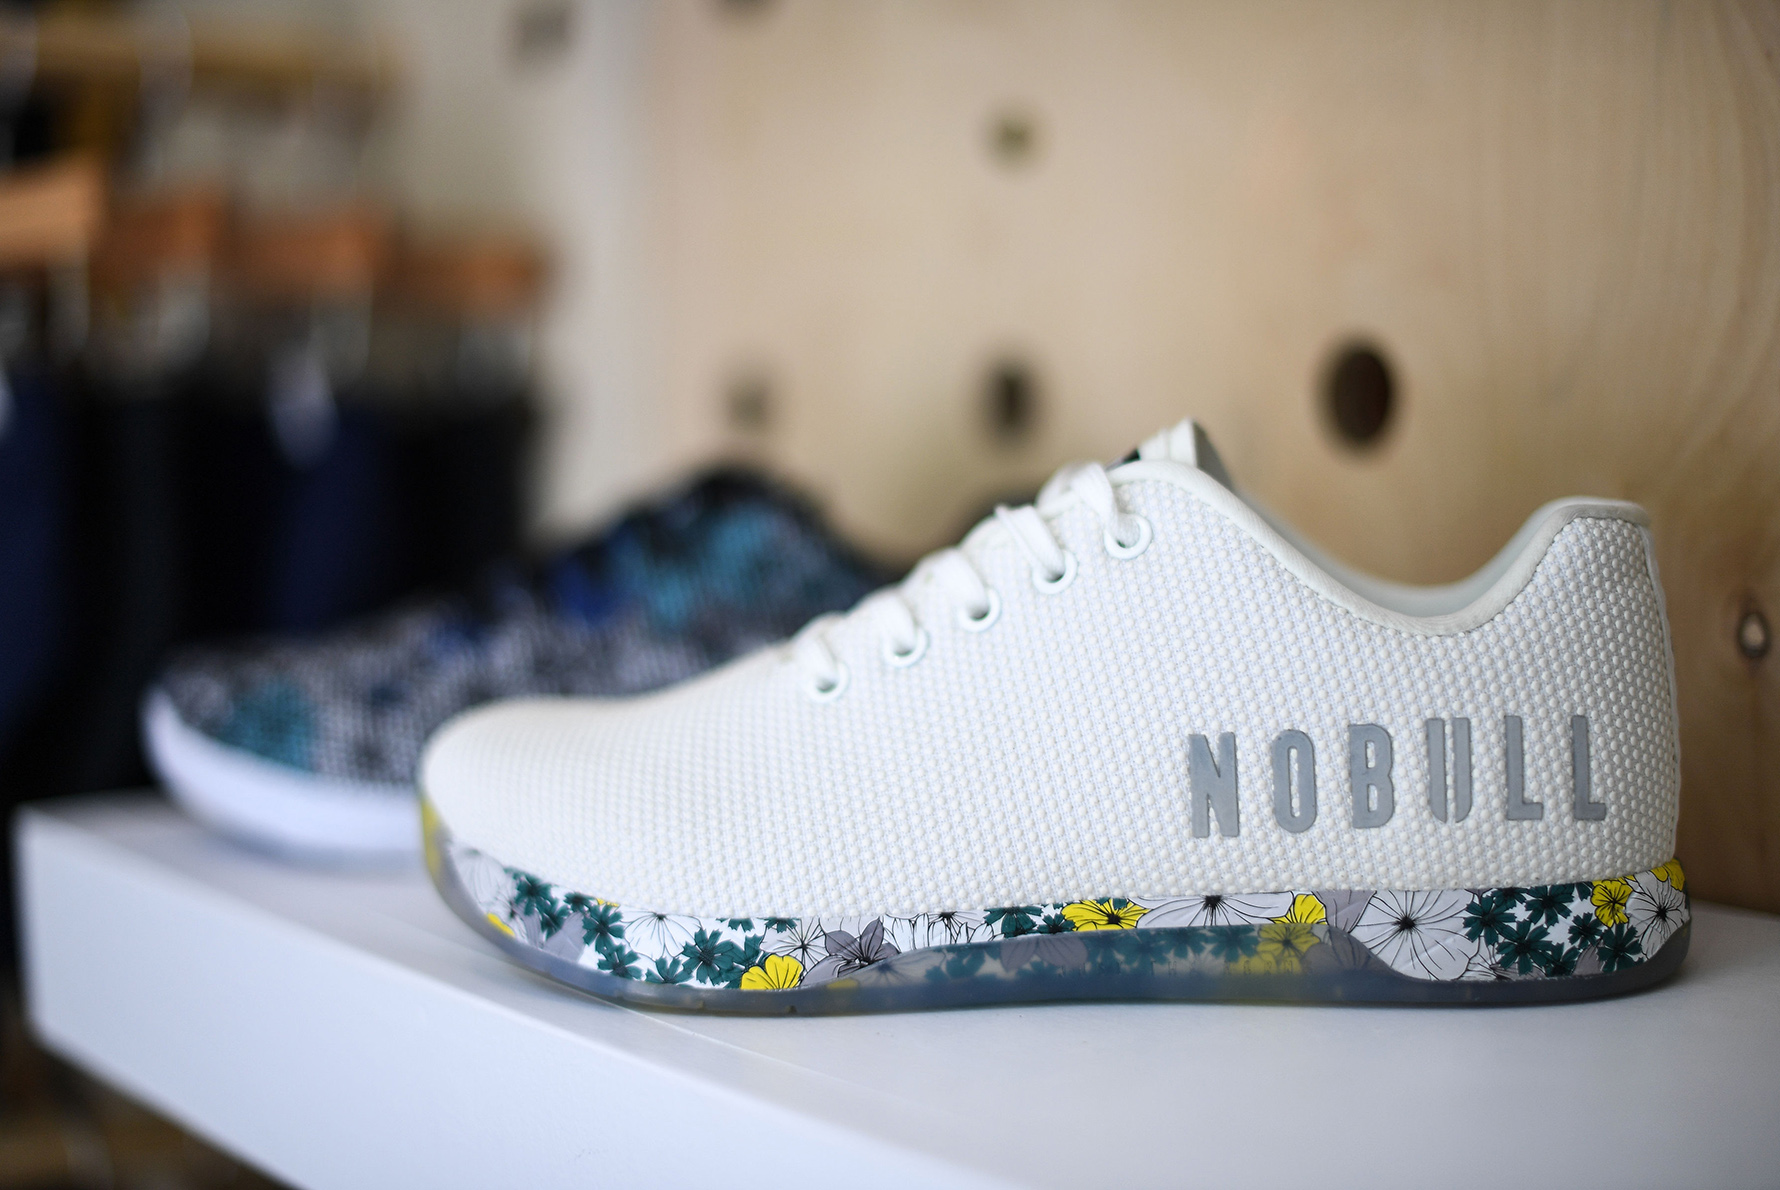 where to buy nobull shoes near me